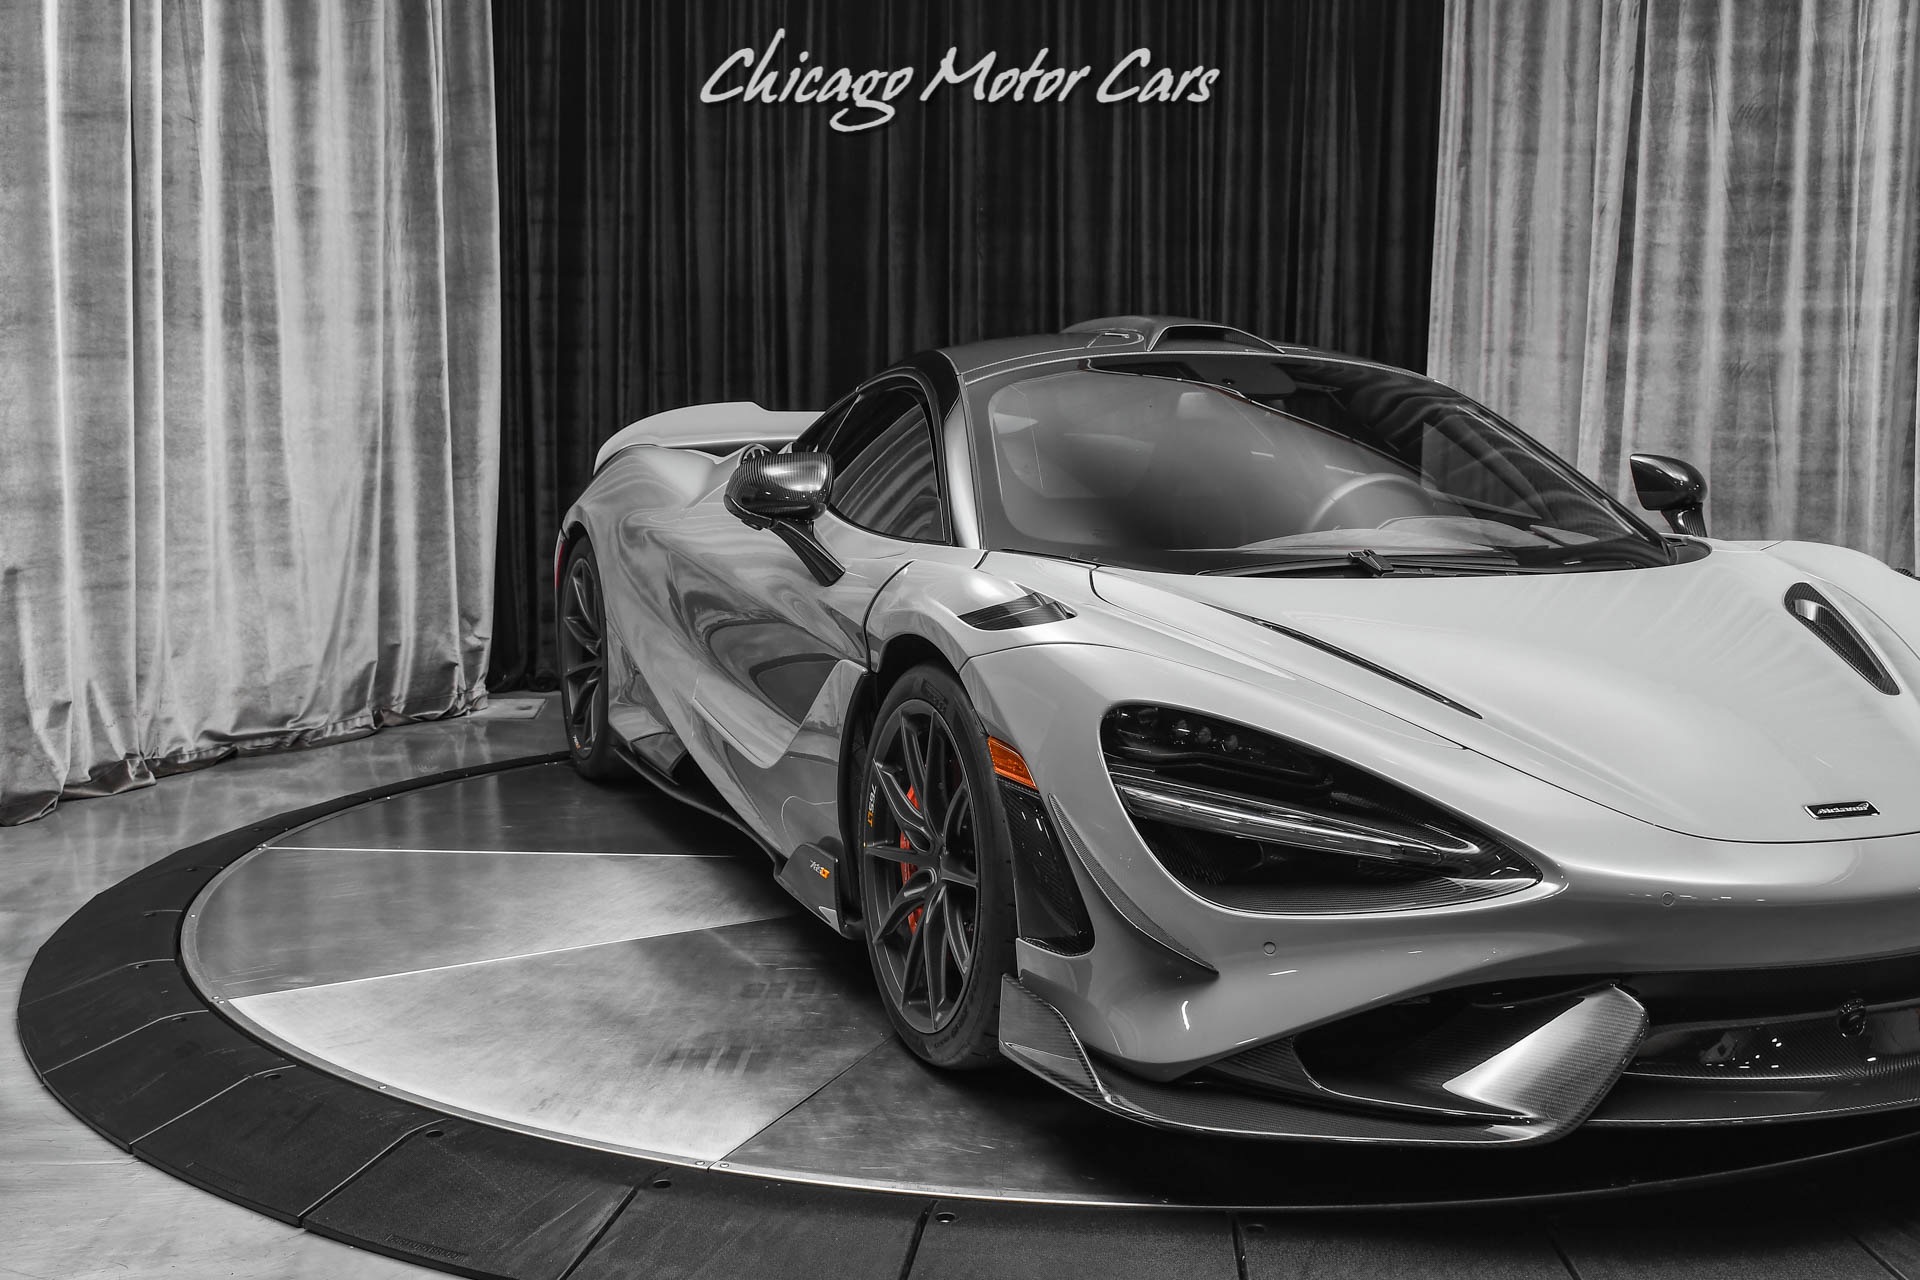 Used 2021 Mclaren 765LT Coupe LOADED! MSO NARDO PAINT